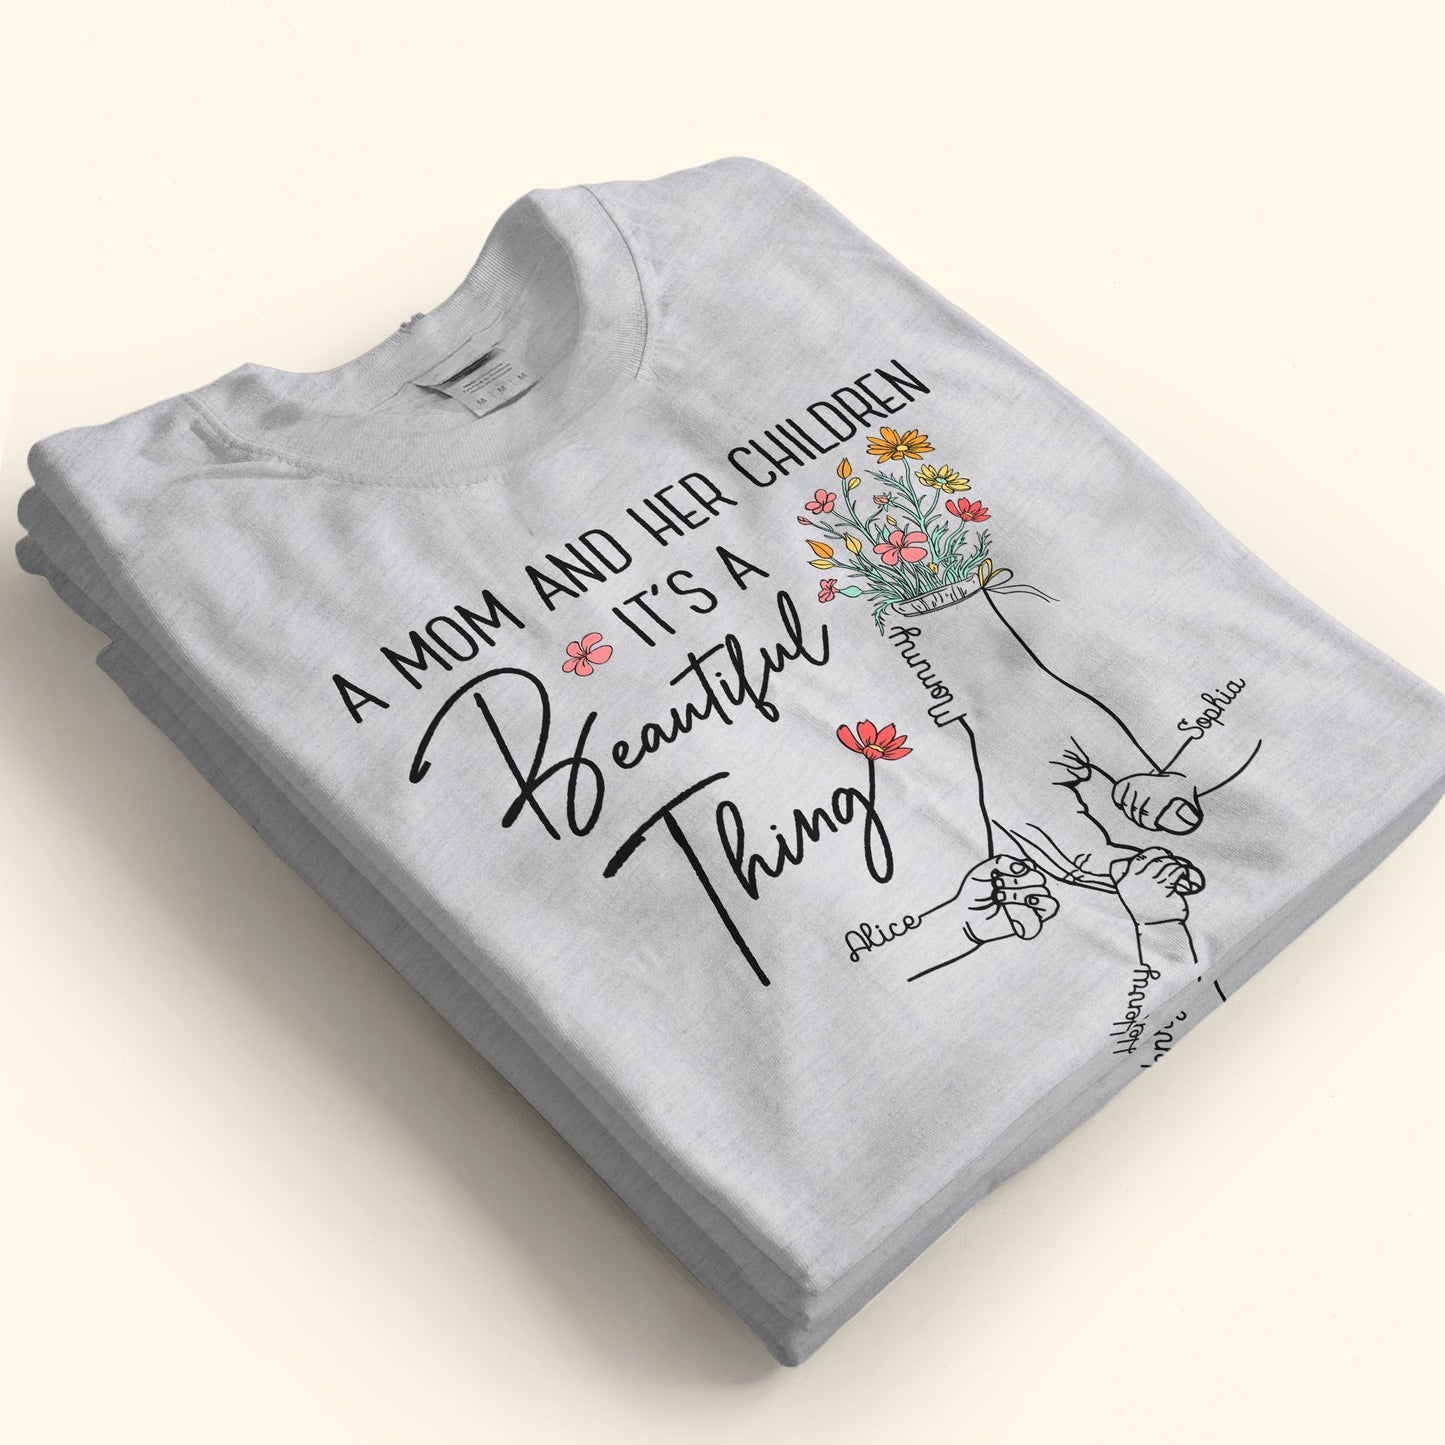 A Mom And Her Children - Personalized Shirt